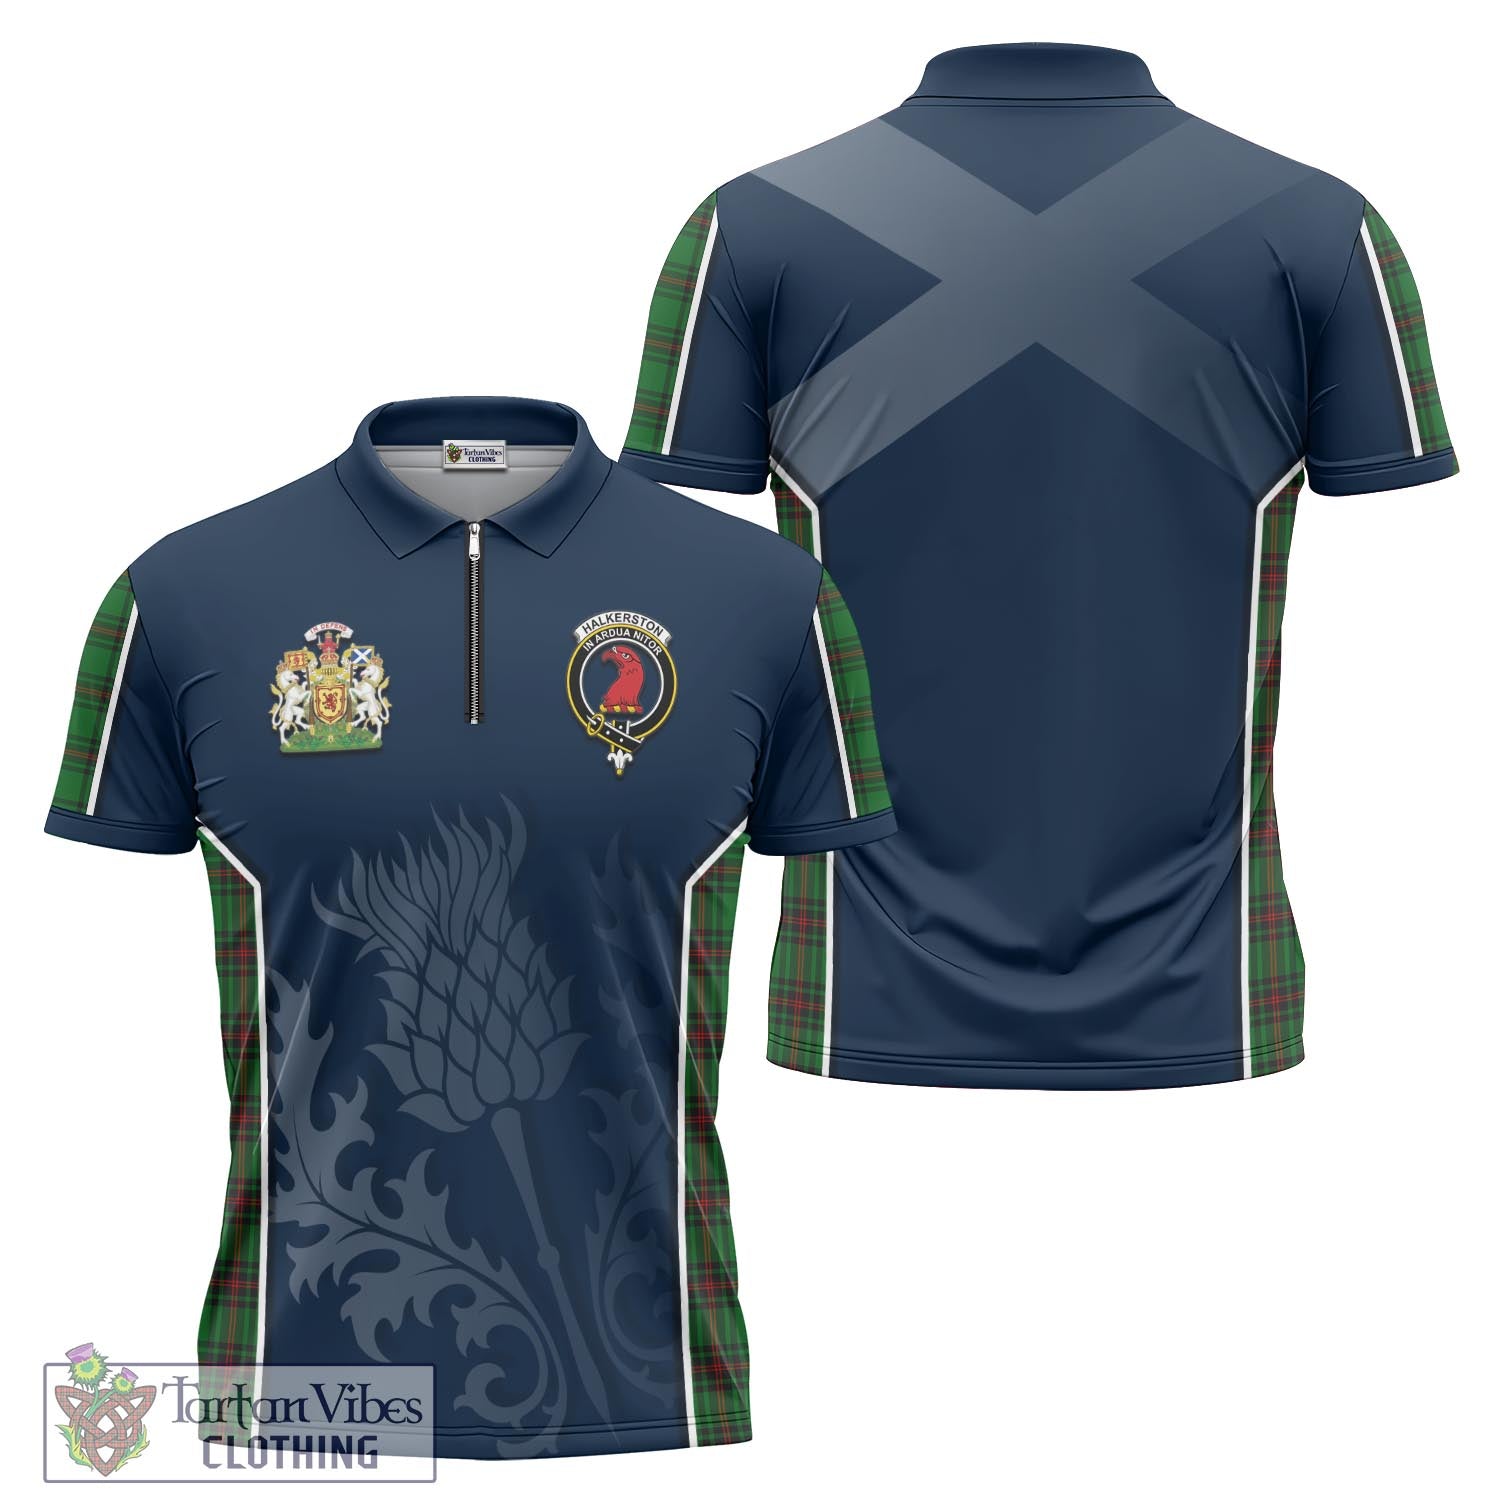 Tartan Vibes Clothing Halkerston Tartan Zipper Polo Shirt with Family Crest and Scottish Thistle Vibes Sport Style